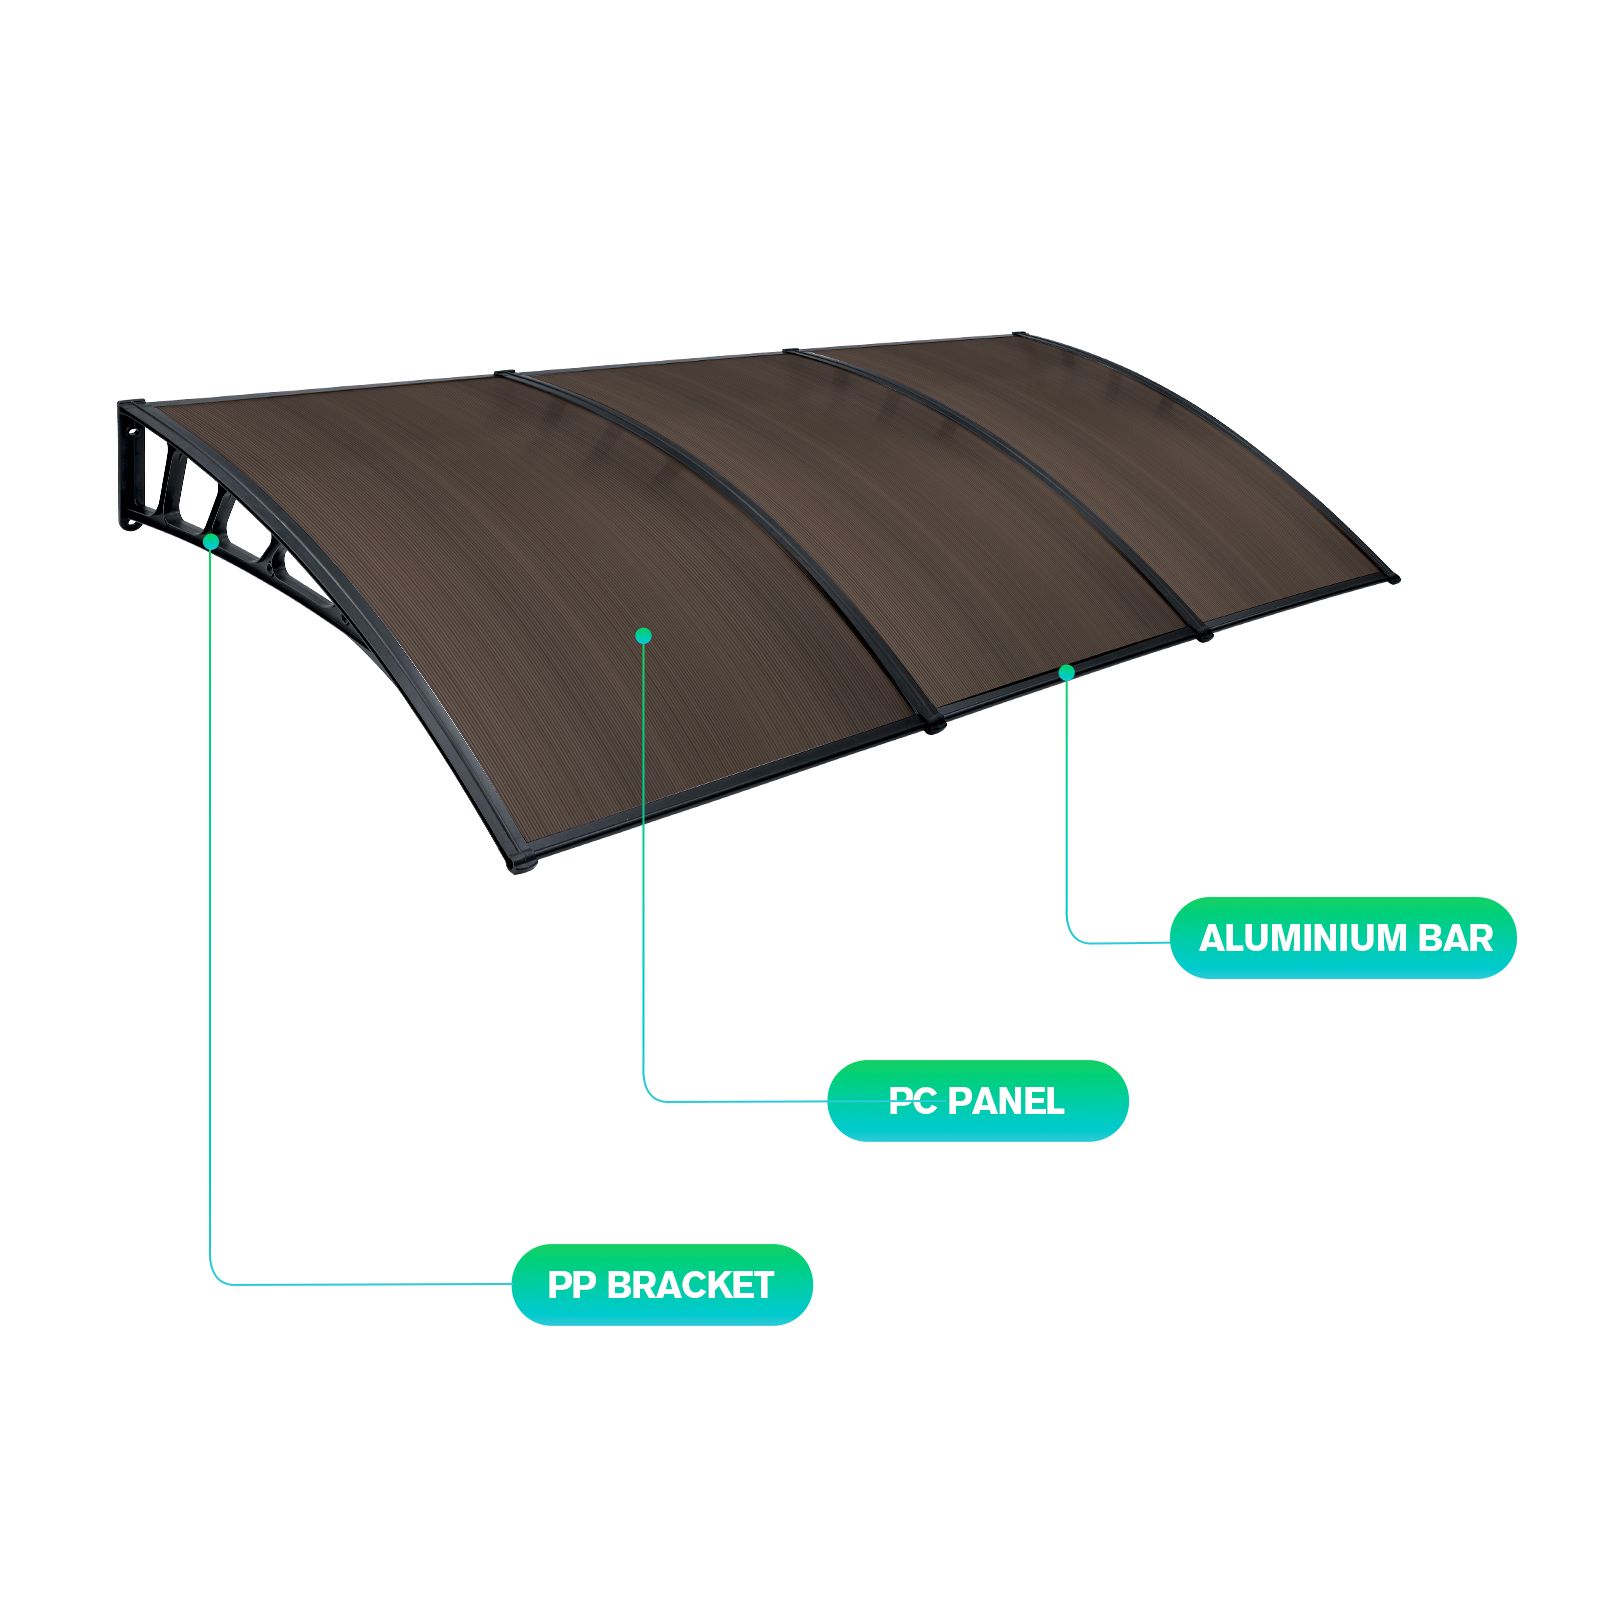 Window Door Awning Outdoor Patio Canopy Deck Balcony Porch House Cover Sun Shade Rain Snow UV Shield Polycarbonate Brown 1.5x3m